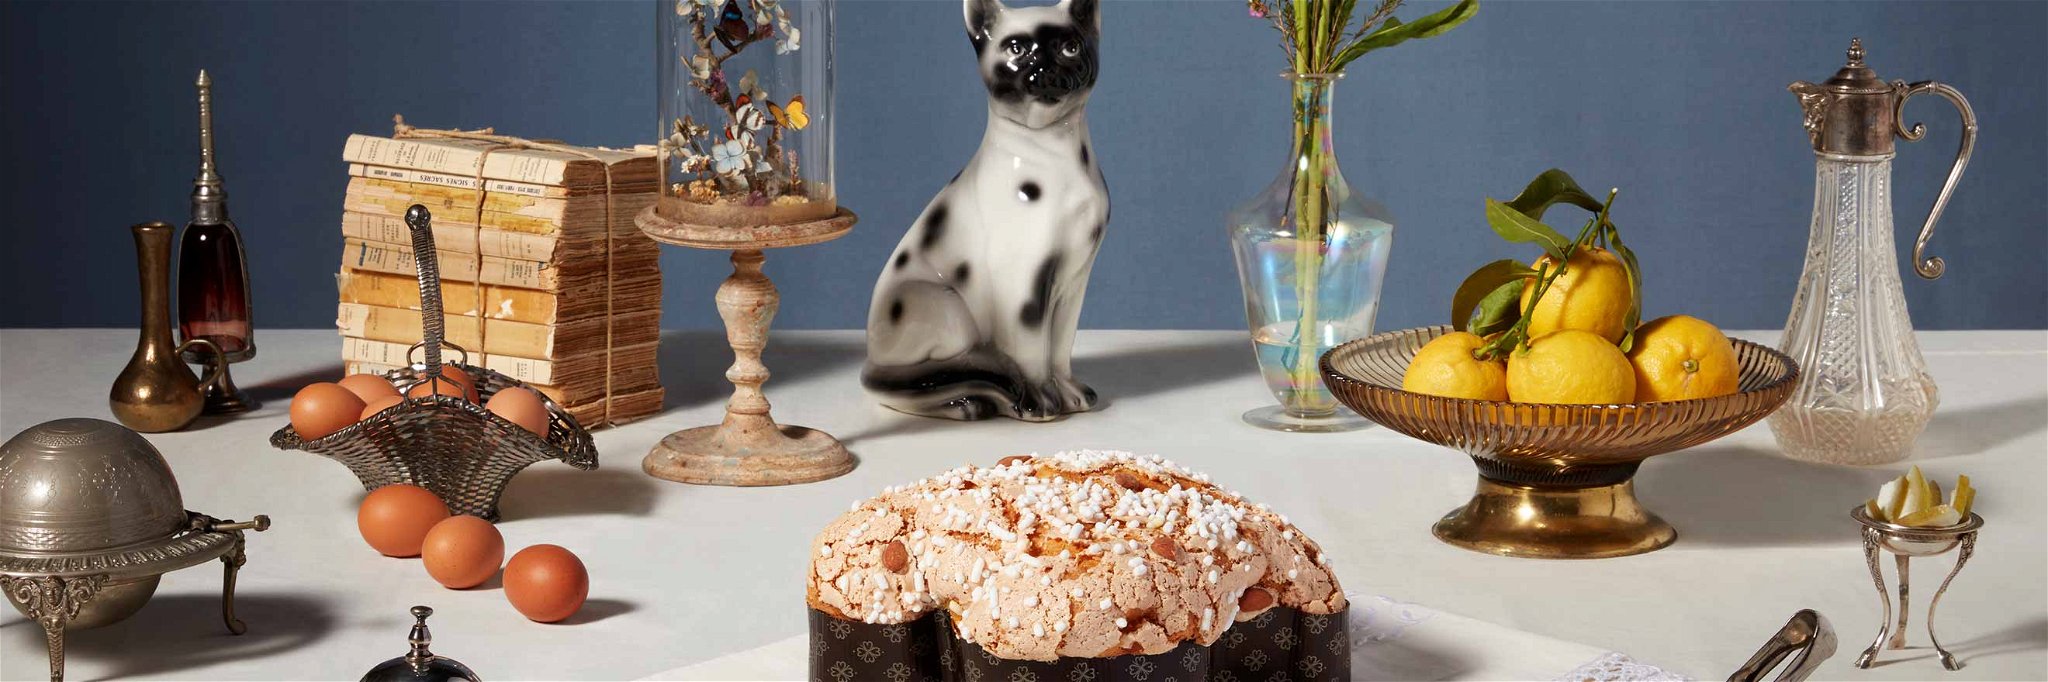 Colomba is a traditional Easter cake.